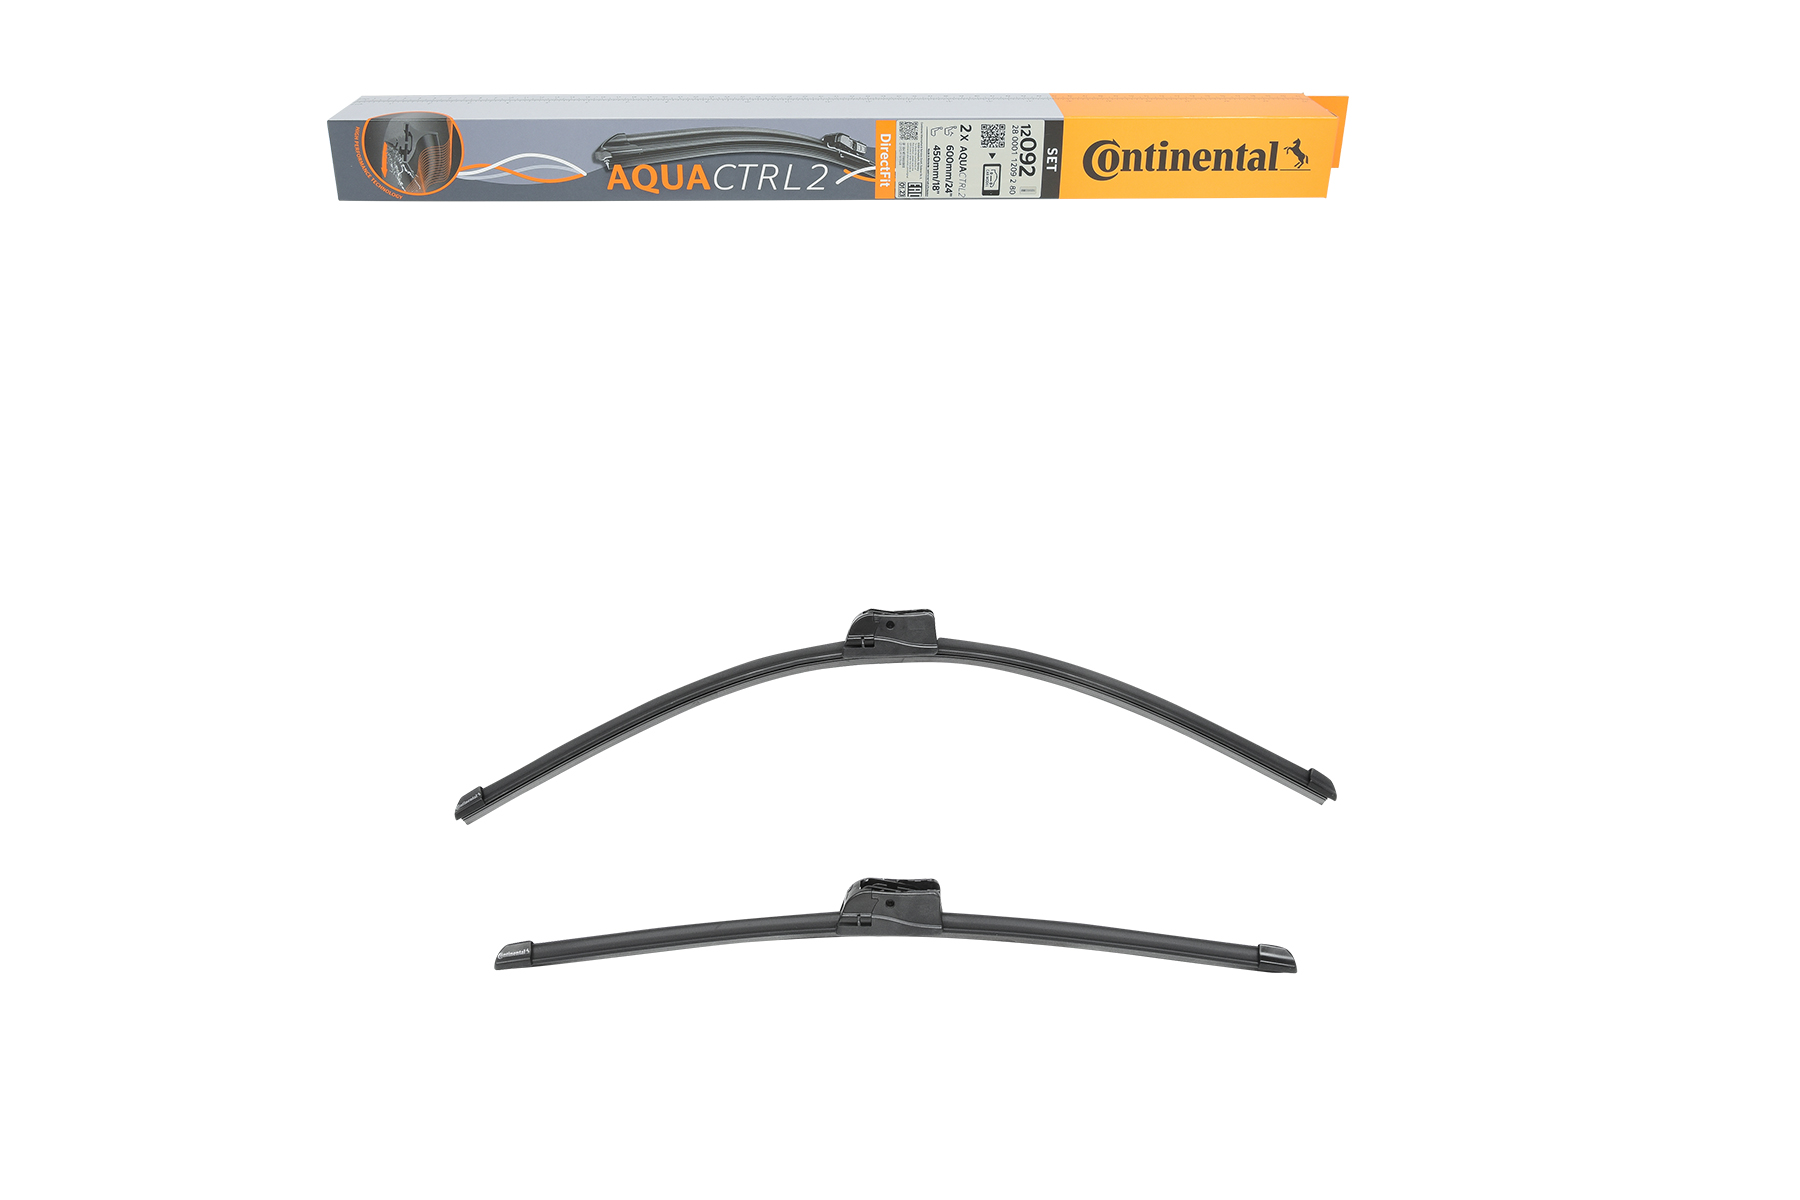 2800011209280 Continental Windscreen wipers SUBARU 600, 450 mm Front, Flat wiper blade, with spoiler, 24/18 Inch